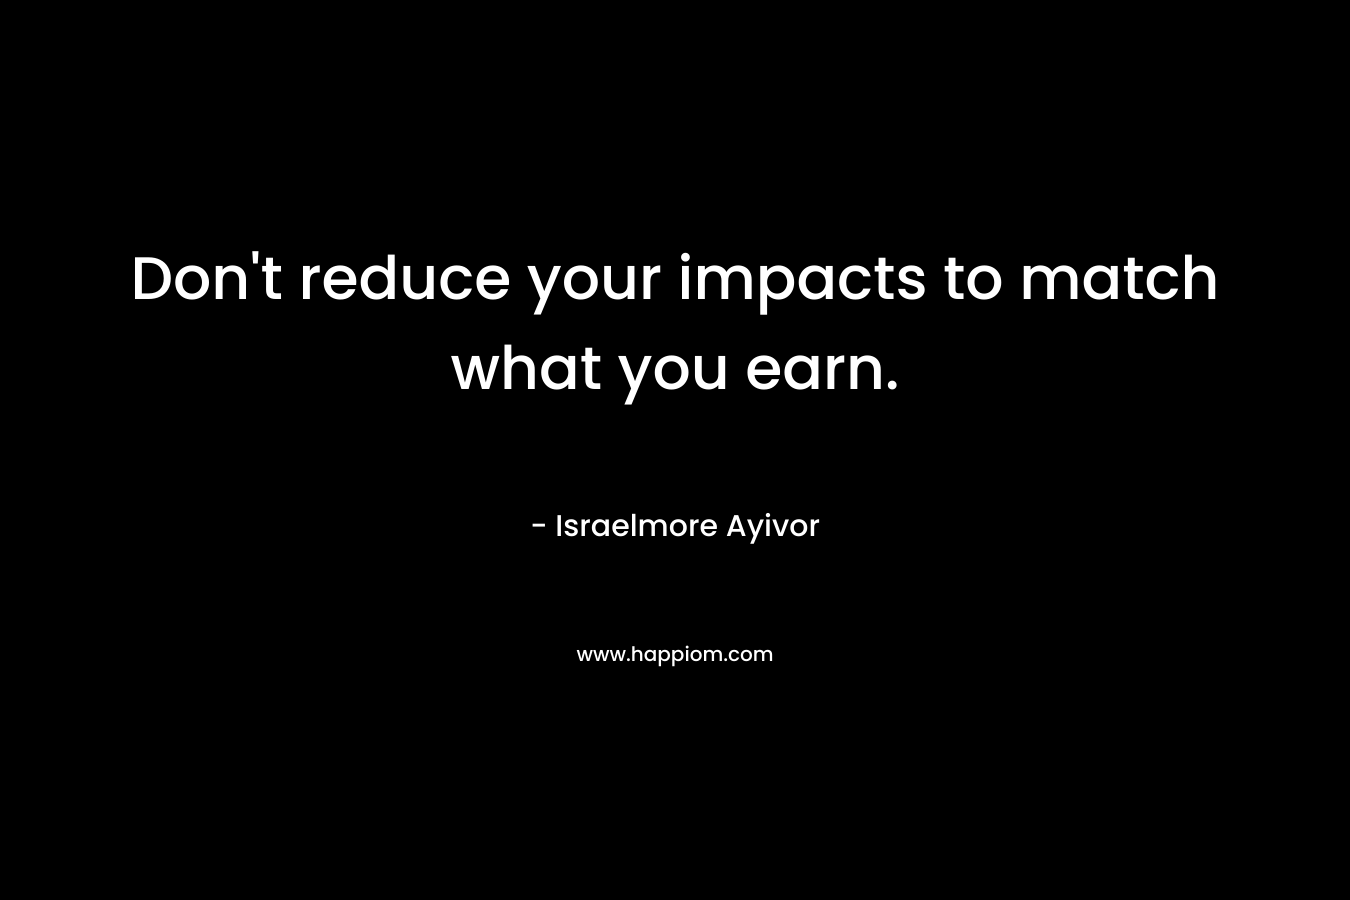 Don't reduce your impacts to match what you earn.